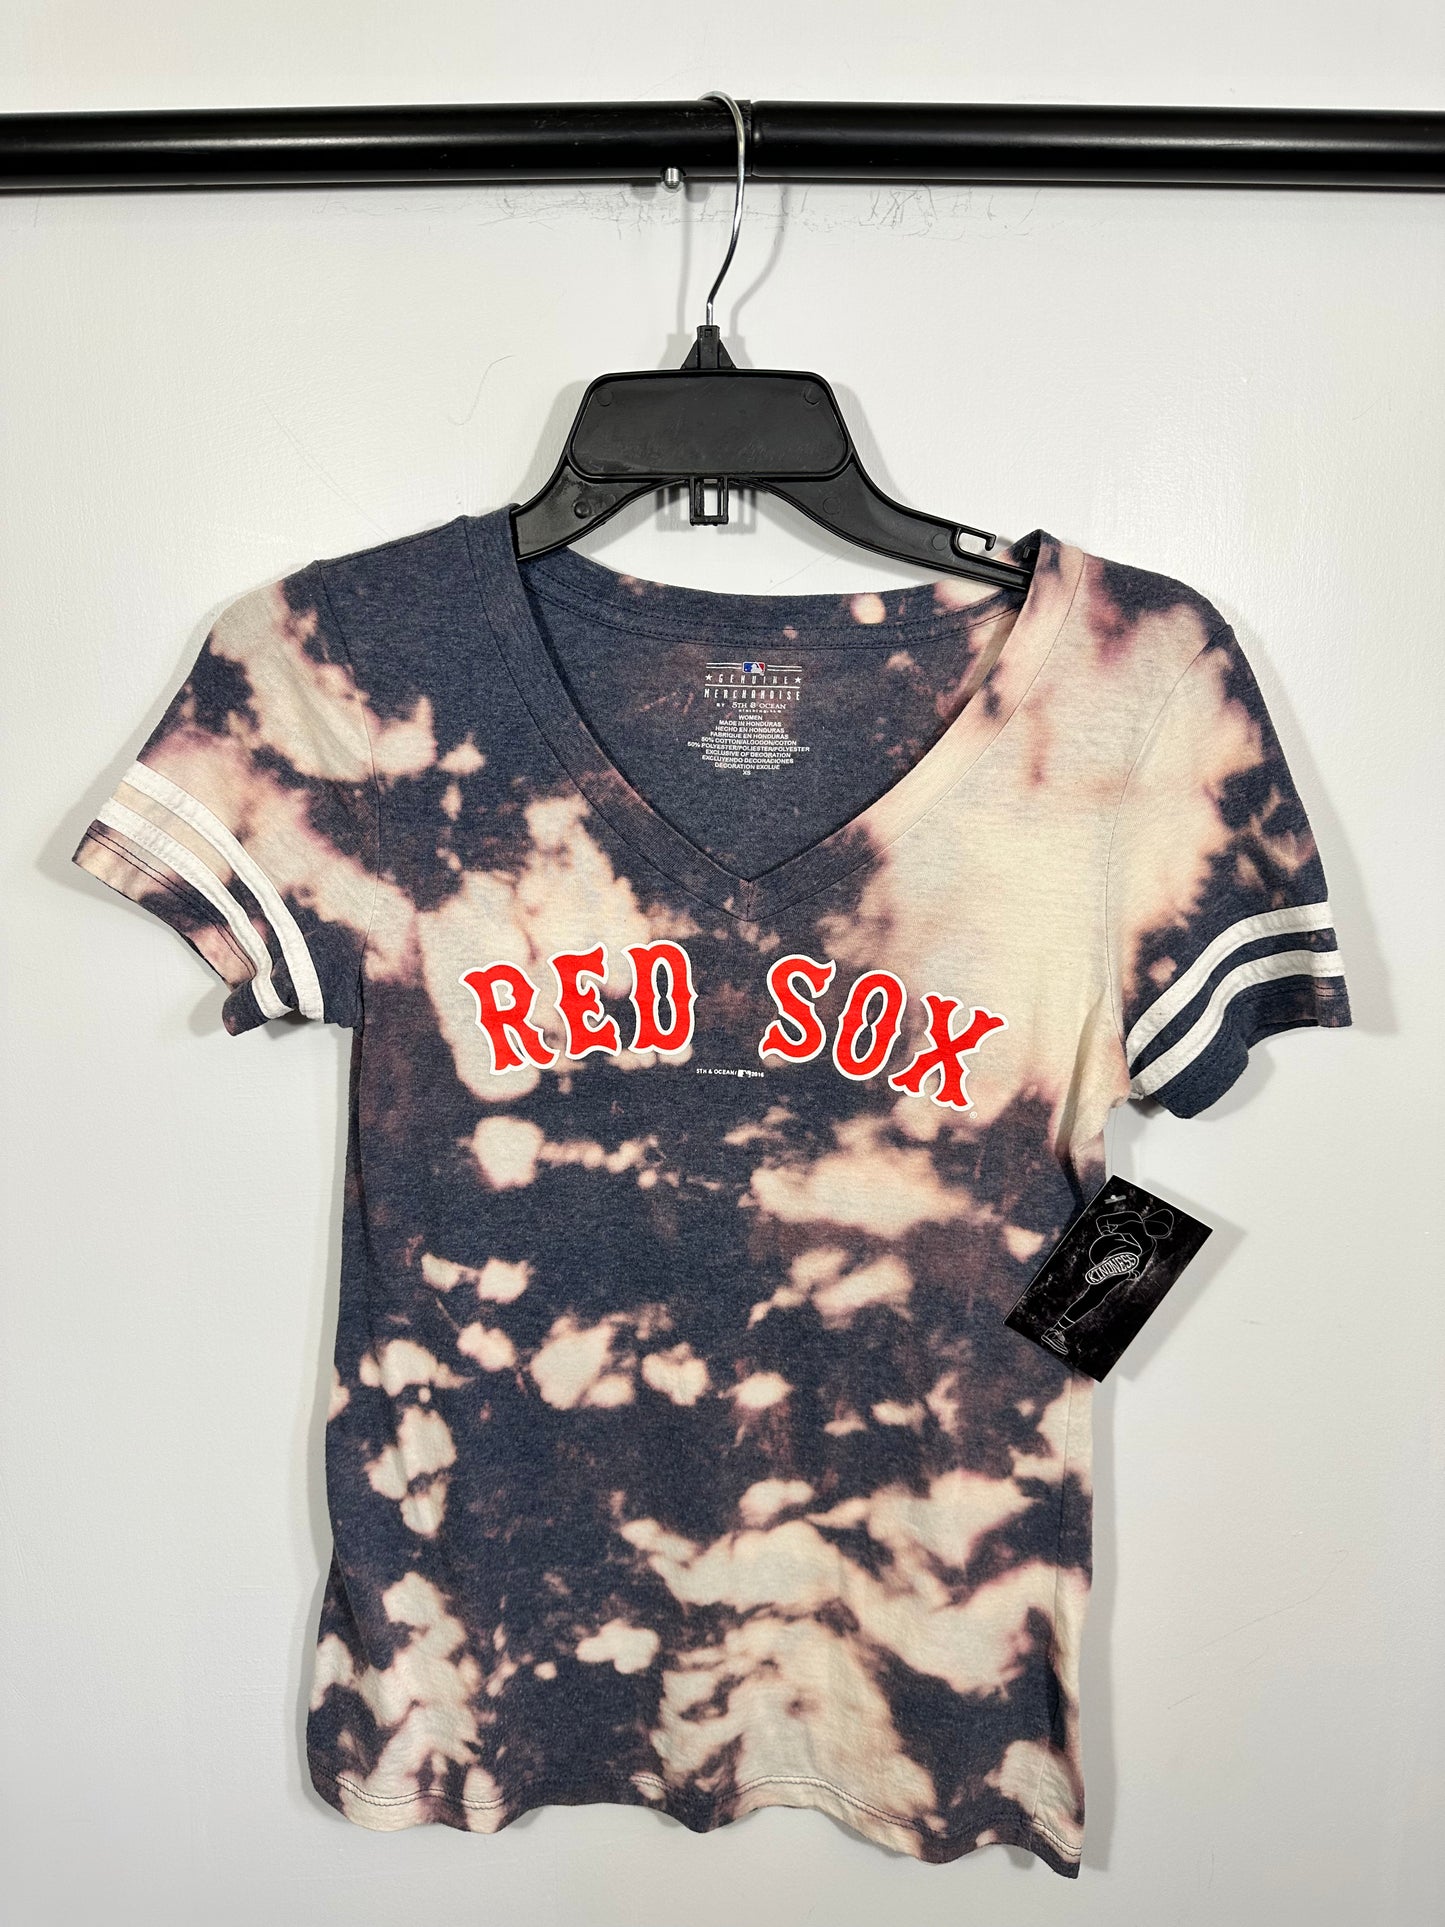 Boston Red Sox Acid Washed Tee